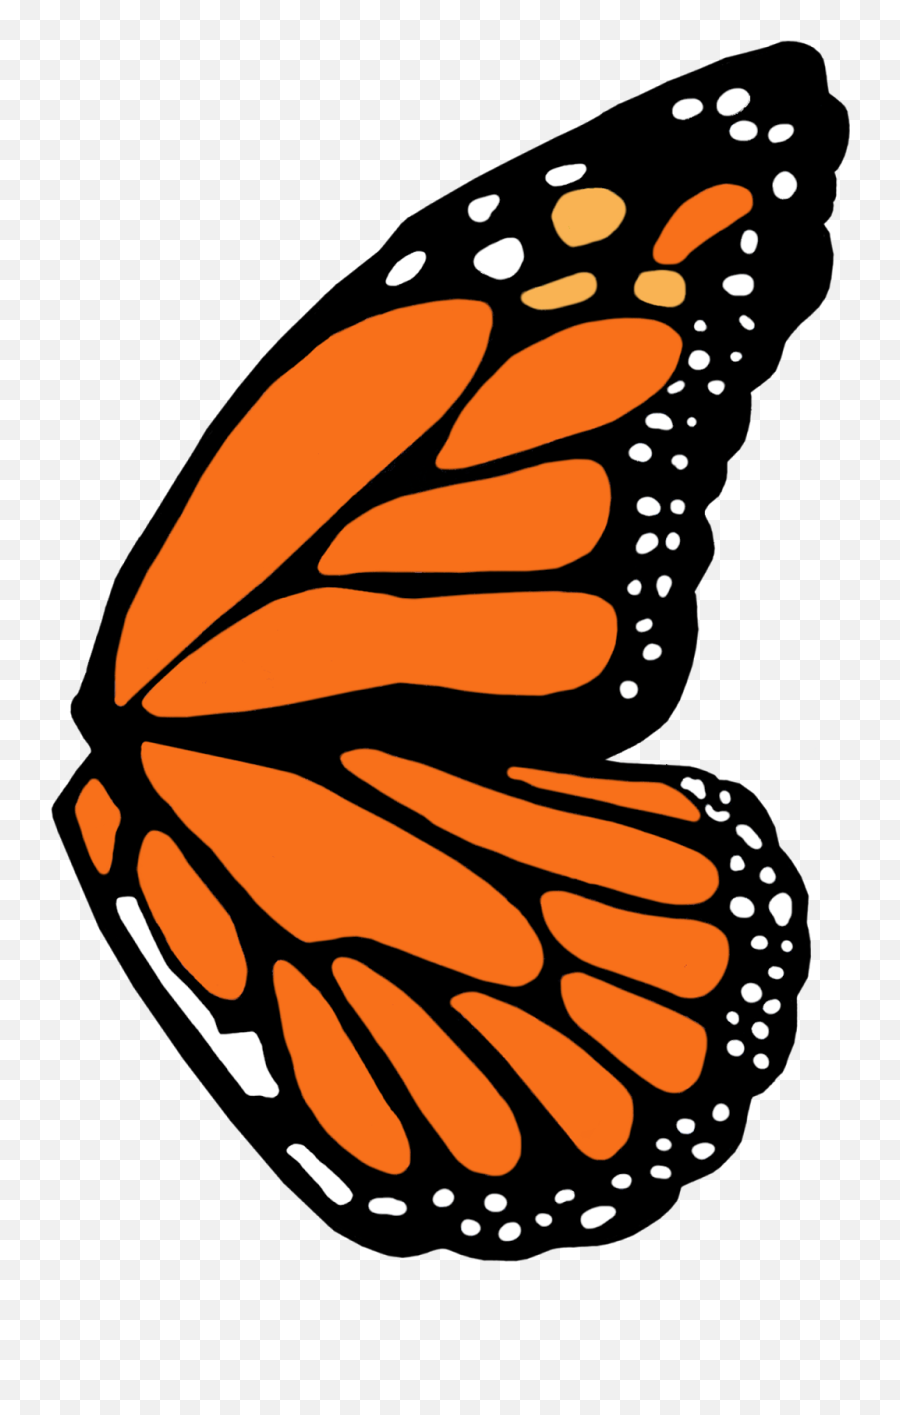 Monarch Butterfly Wing Template Transparent Cartoon - Jingfm Clipart Monarch Butterfly Wing Emoji,Butterfly Outline Clipart